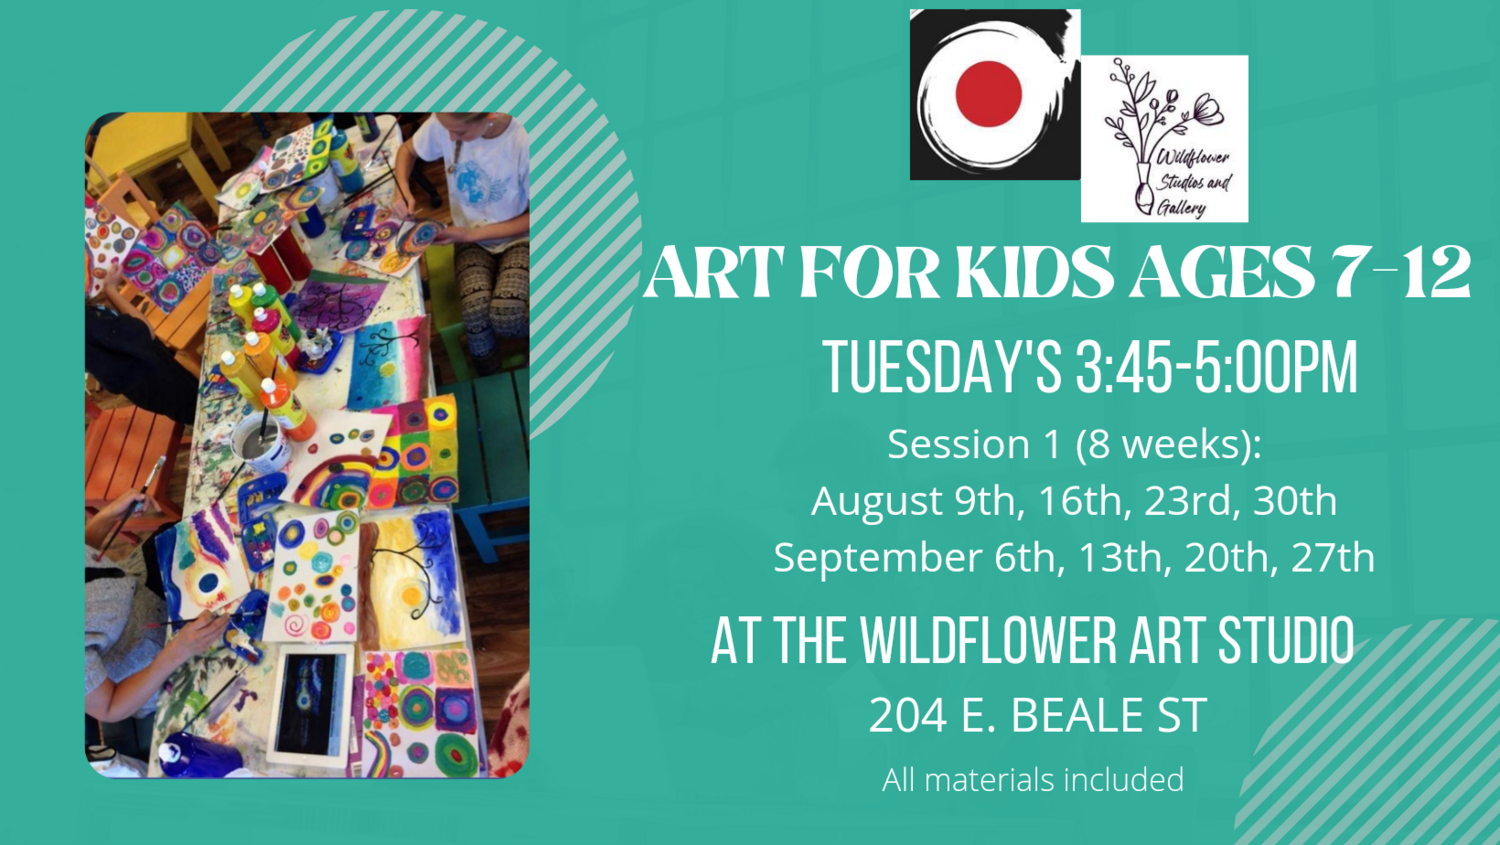 Art for Kids Ages 7-12 DROP IN